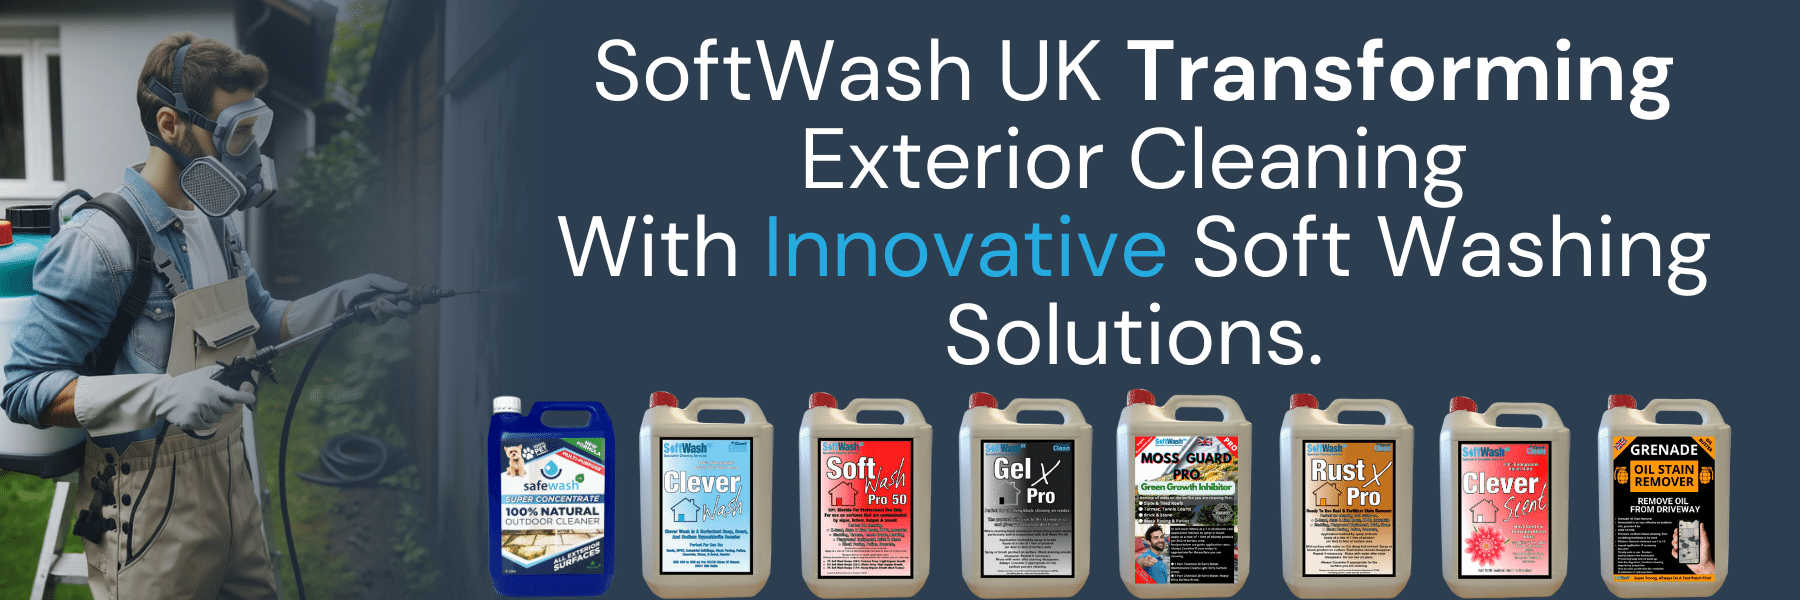 SoftWash UK Transforming Exterior Cleaning With Innovative Soft Washing Solutions 1800 x 600 px